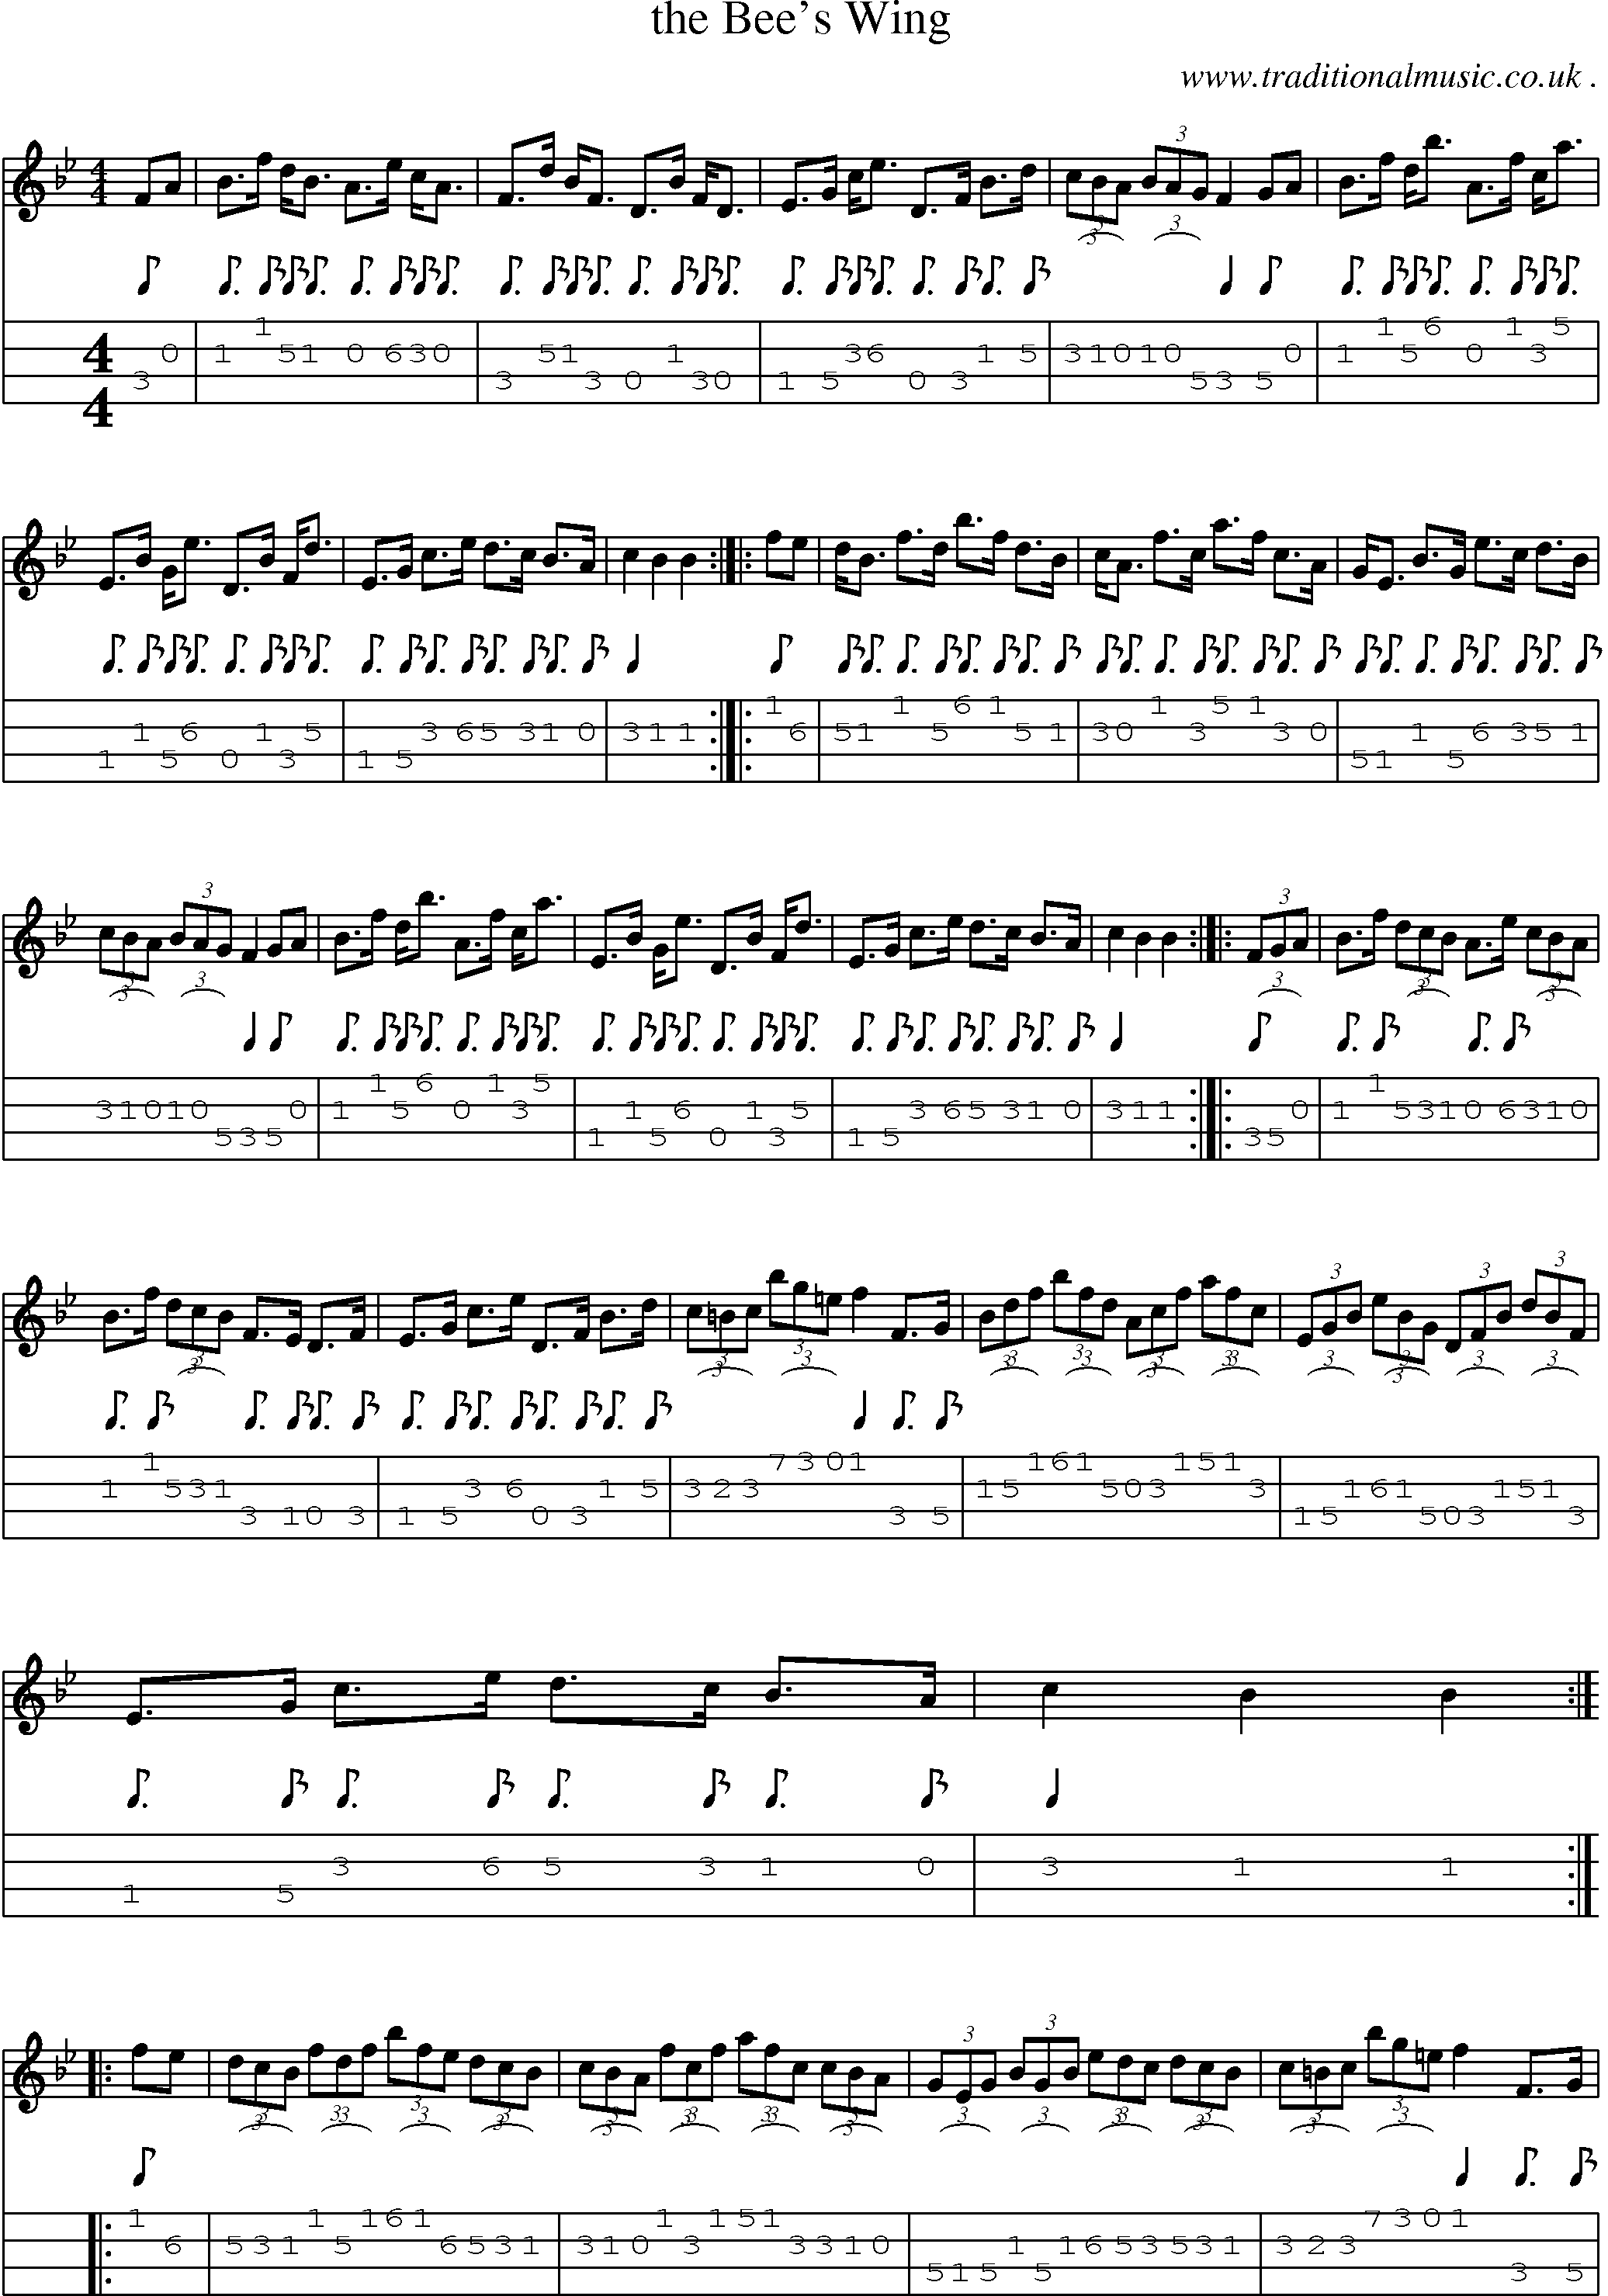 Sheet-Music and Mandolin Tabs for The Bees Wing